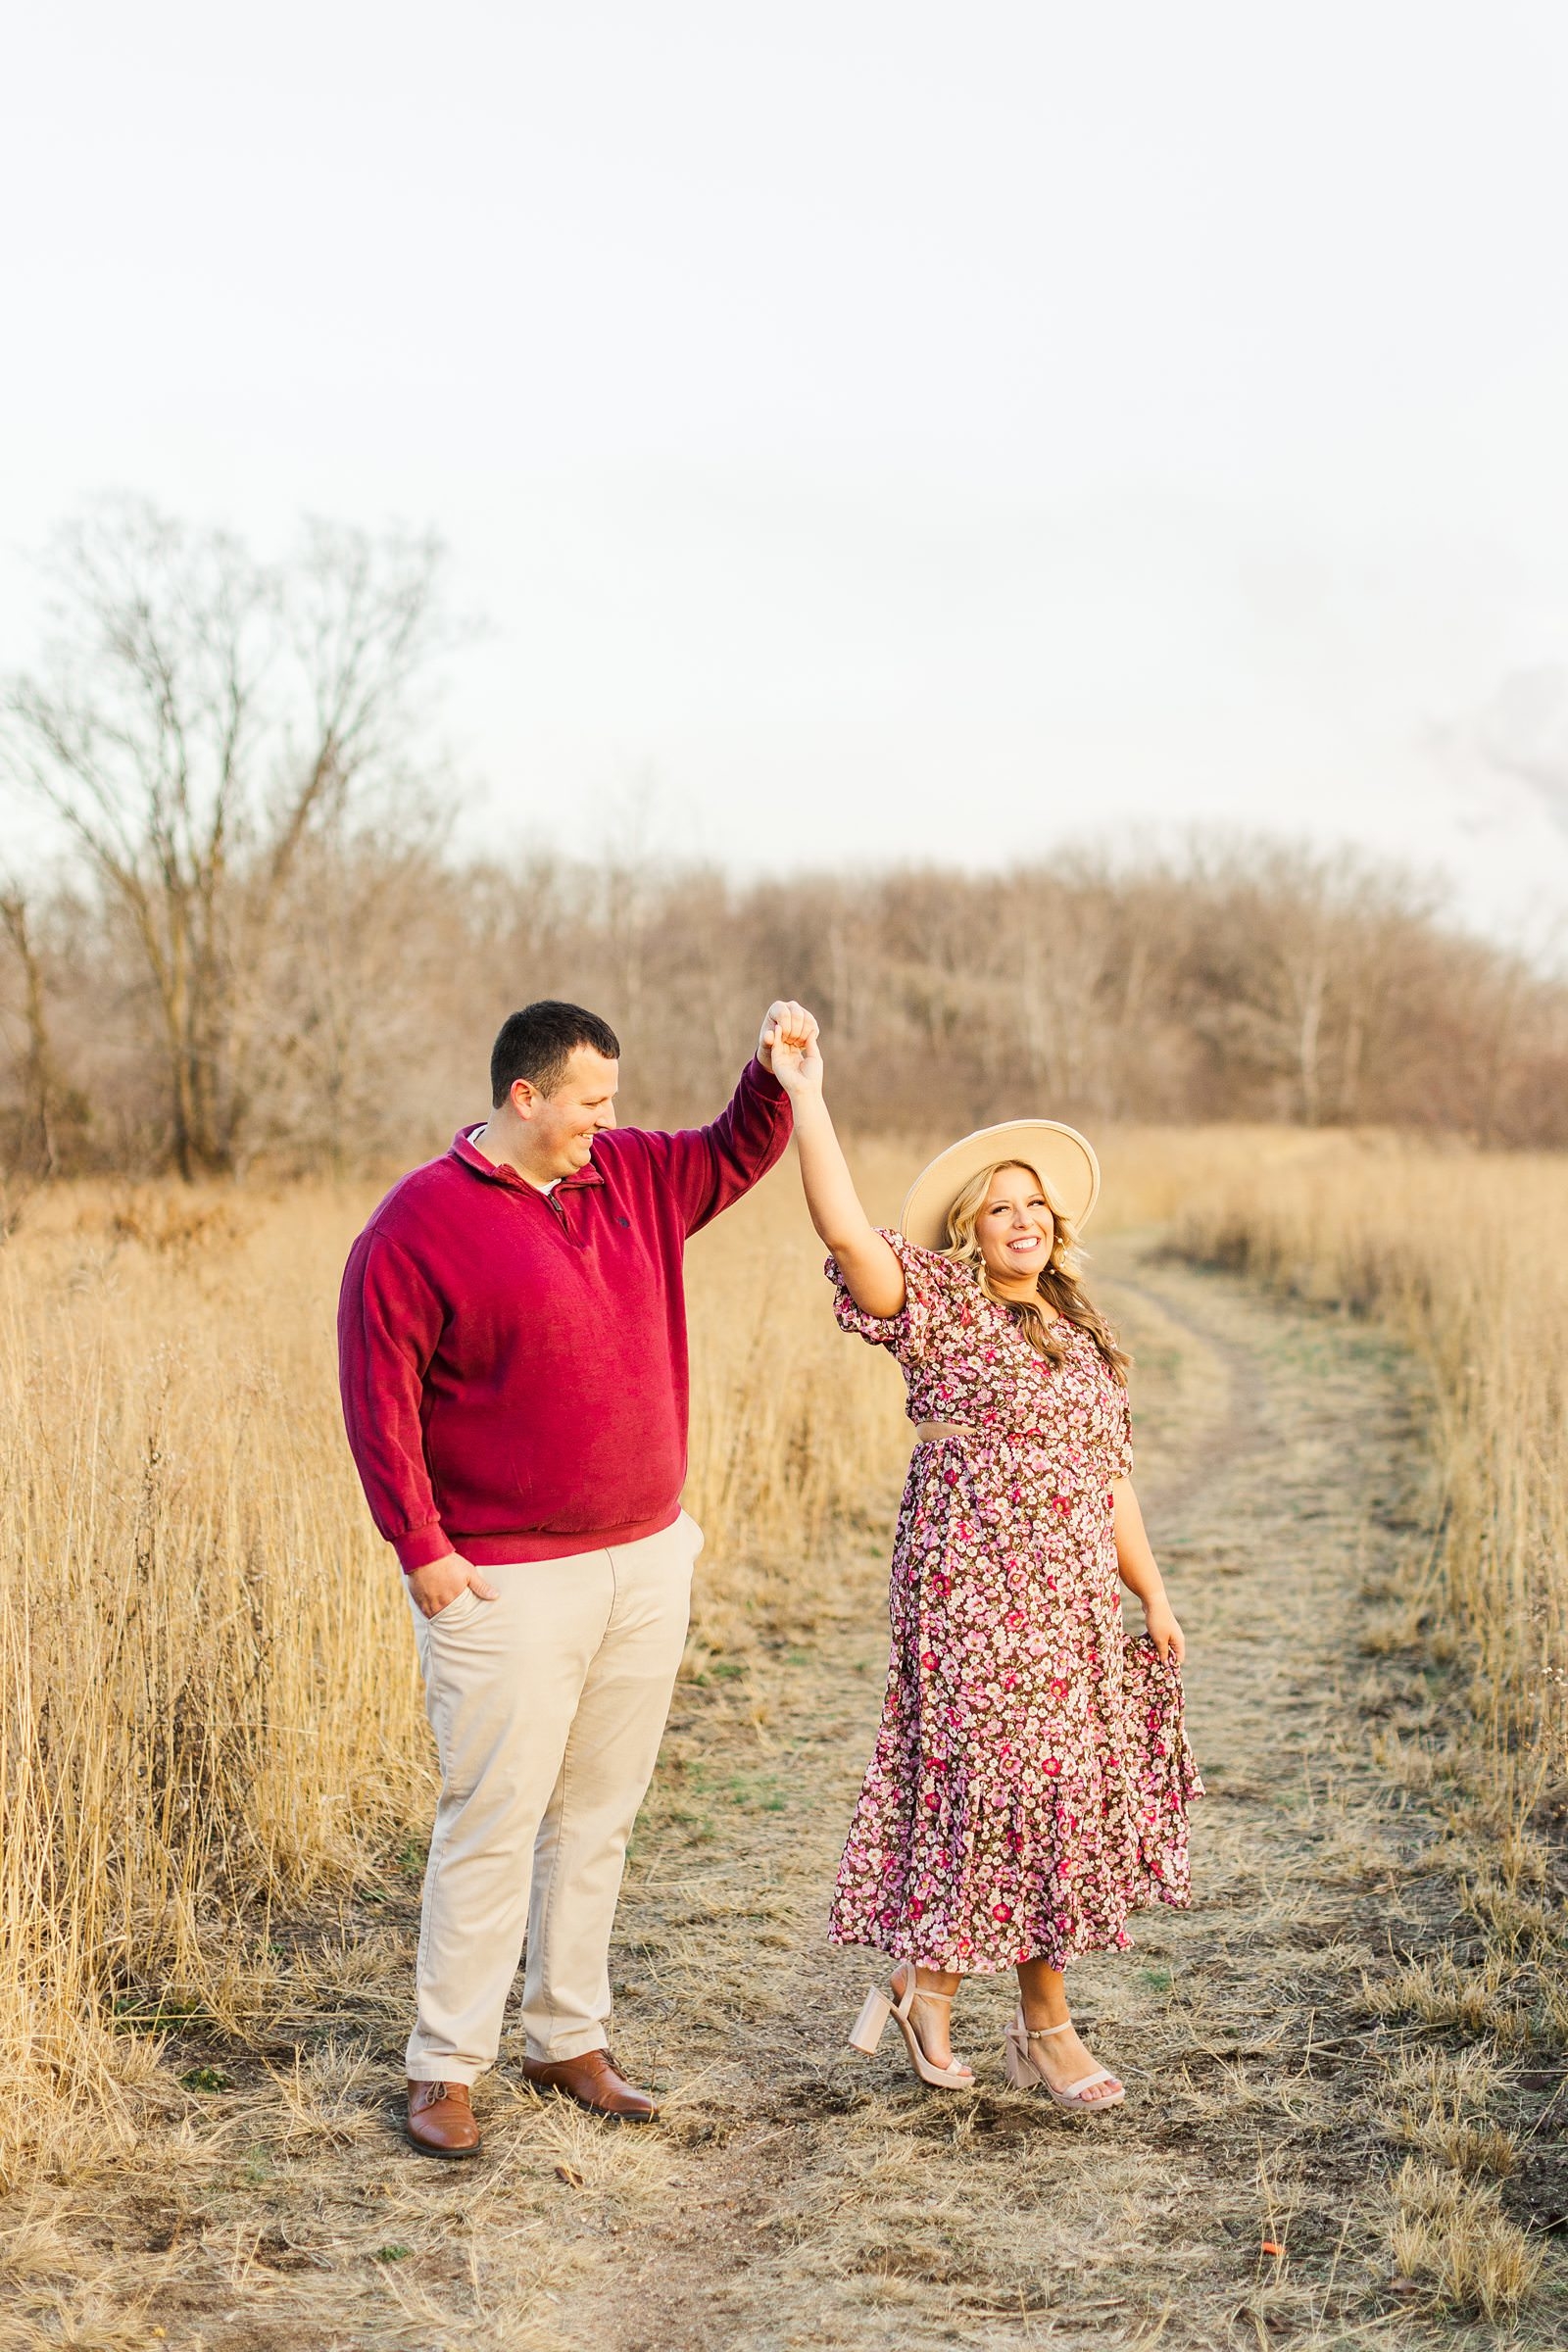 A Winter Downtown Newburgh Engagement Session | Paige and Dylan42.jpg